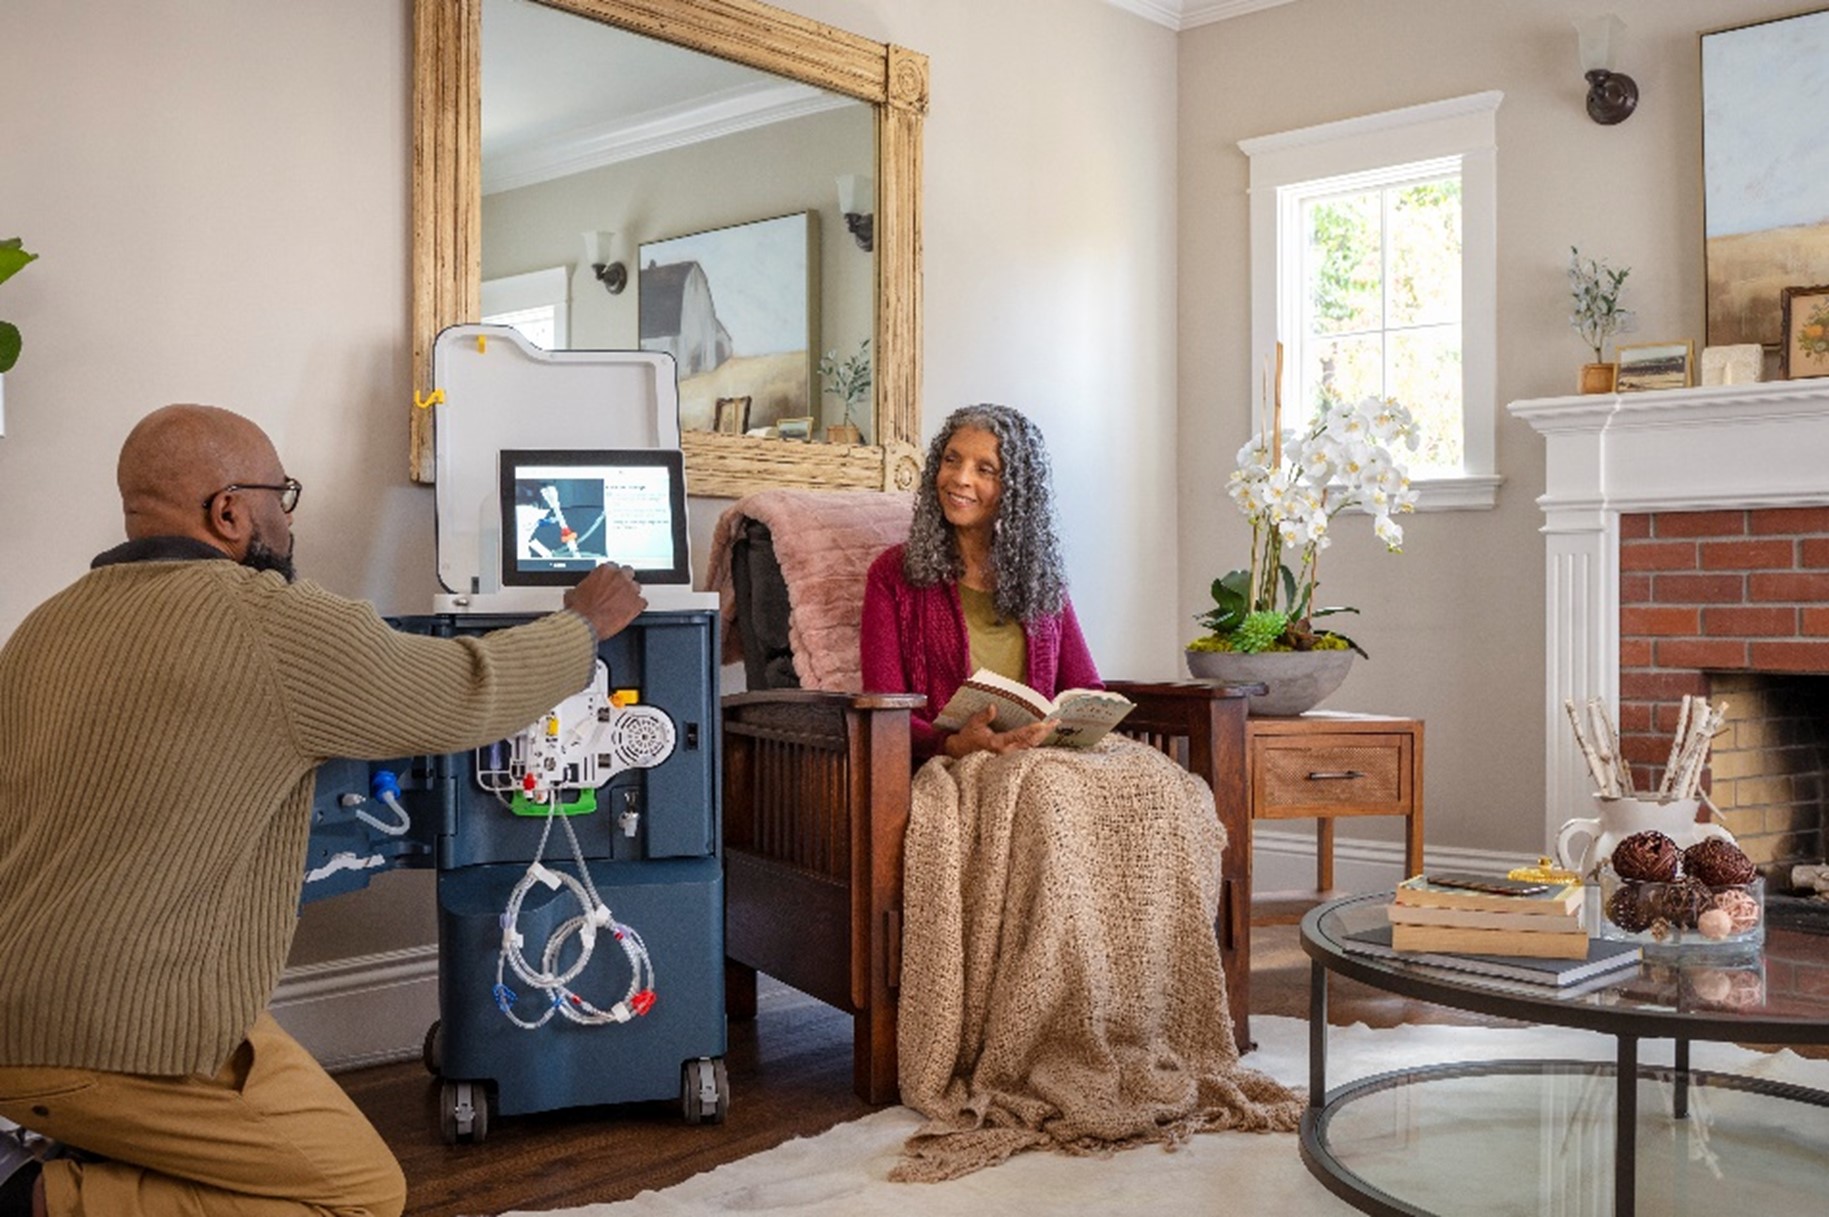 Can New Technology Make Home Dialysis a More Realistic Option?